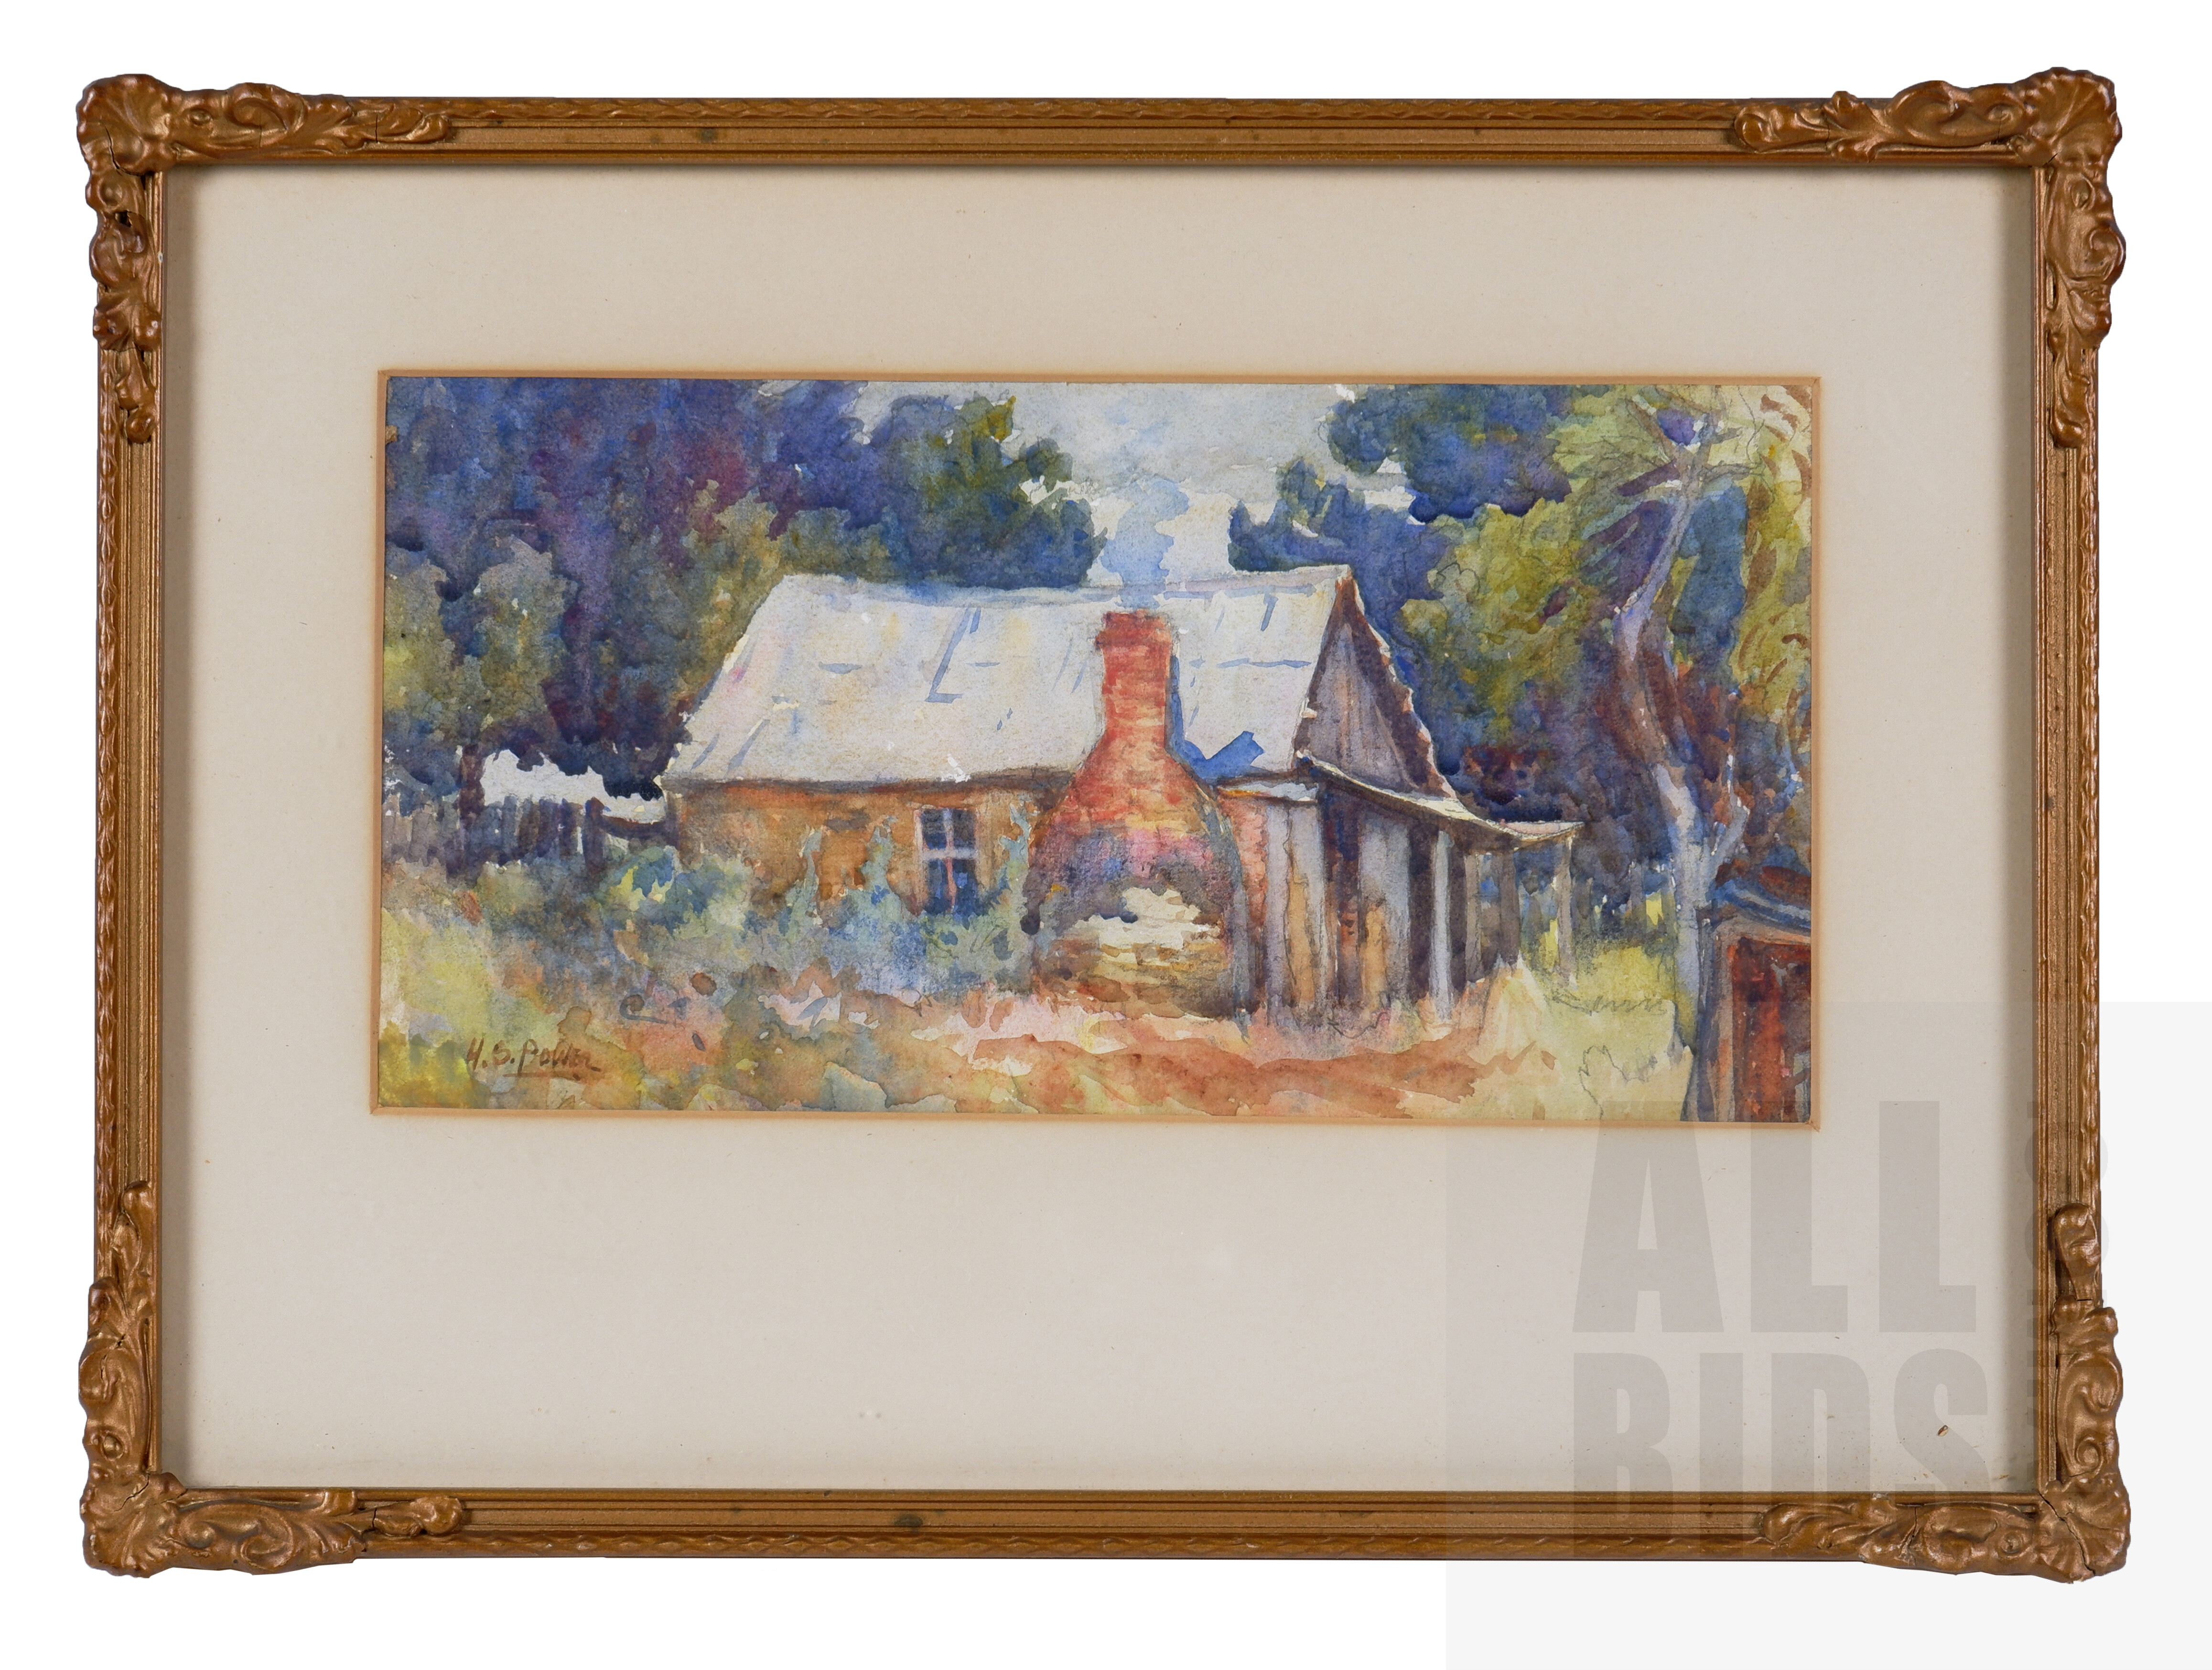 'Harold Septimus Power (1878-1951), Untitled (Country Cottage), Watercolour, 13 x 27 cm'